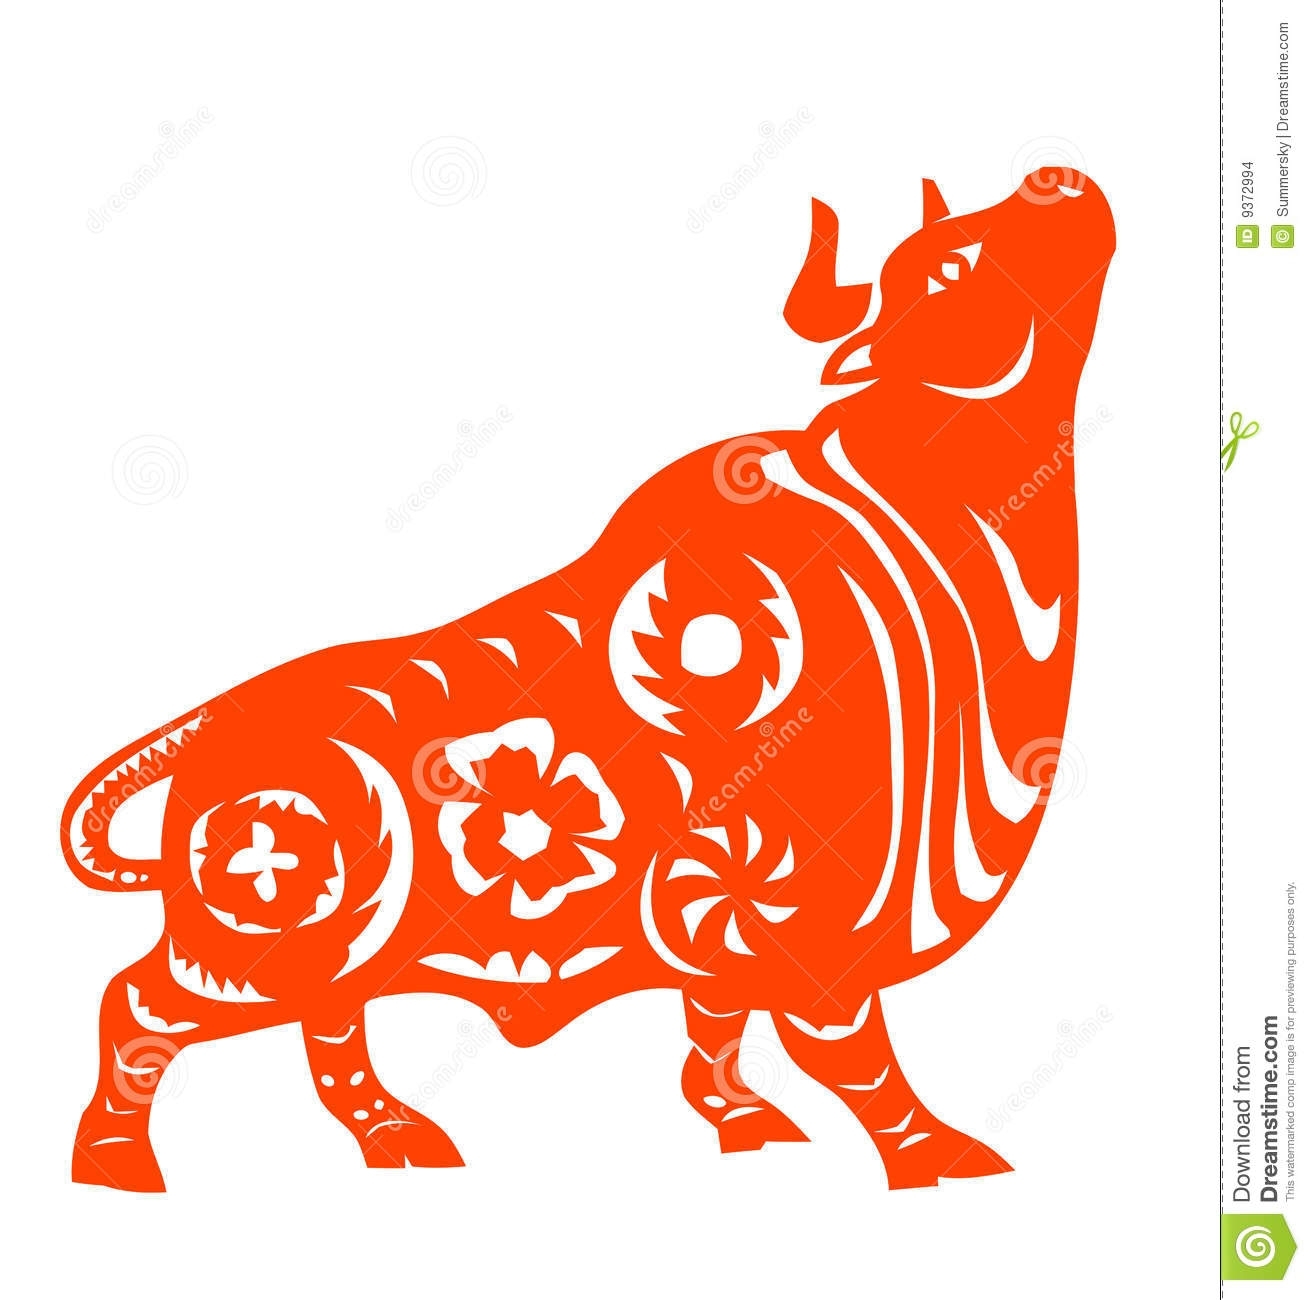 Chinese Zodiac Of Ox Stock Vector. Illustration Of Festival